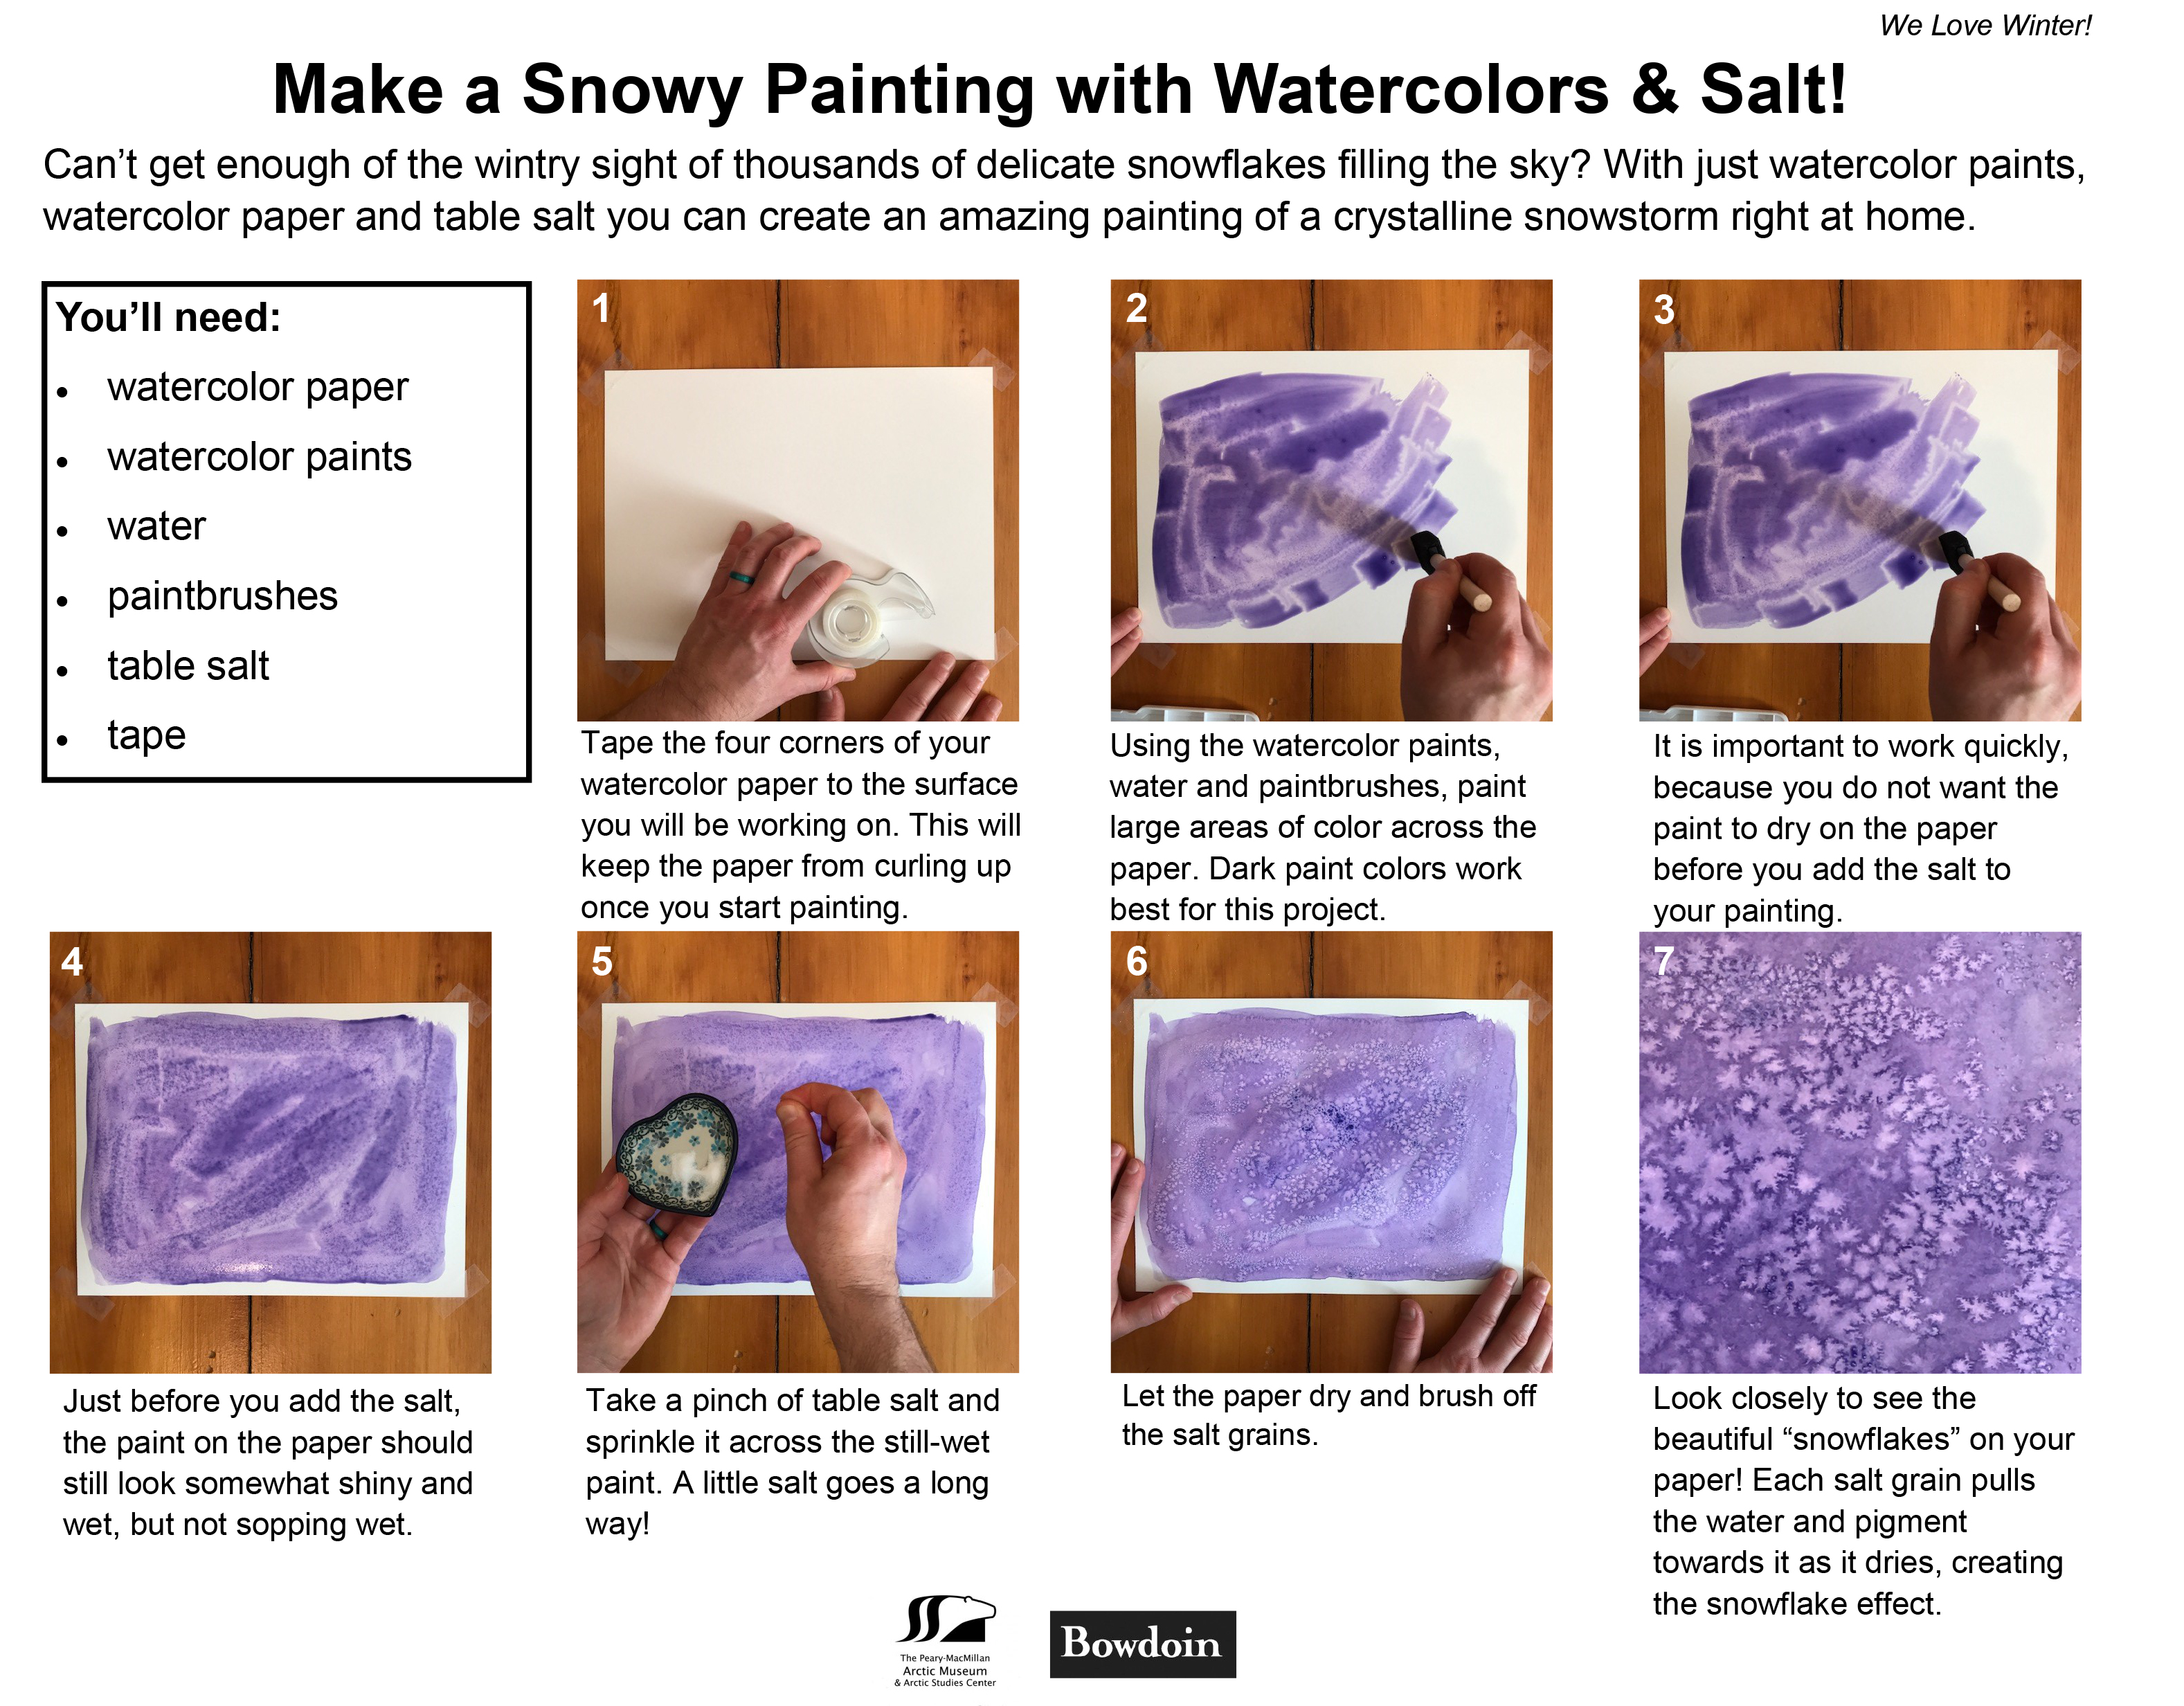 Instructions for making a snowy painting with watercolors and salt